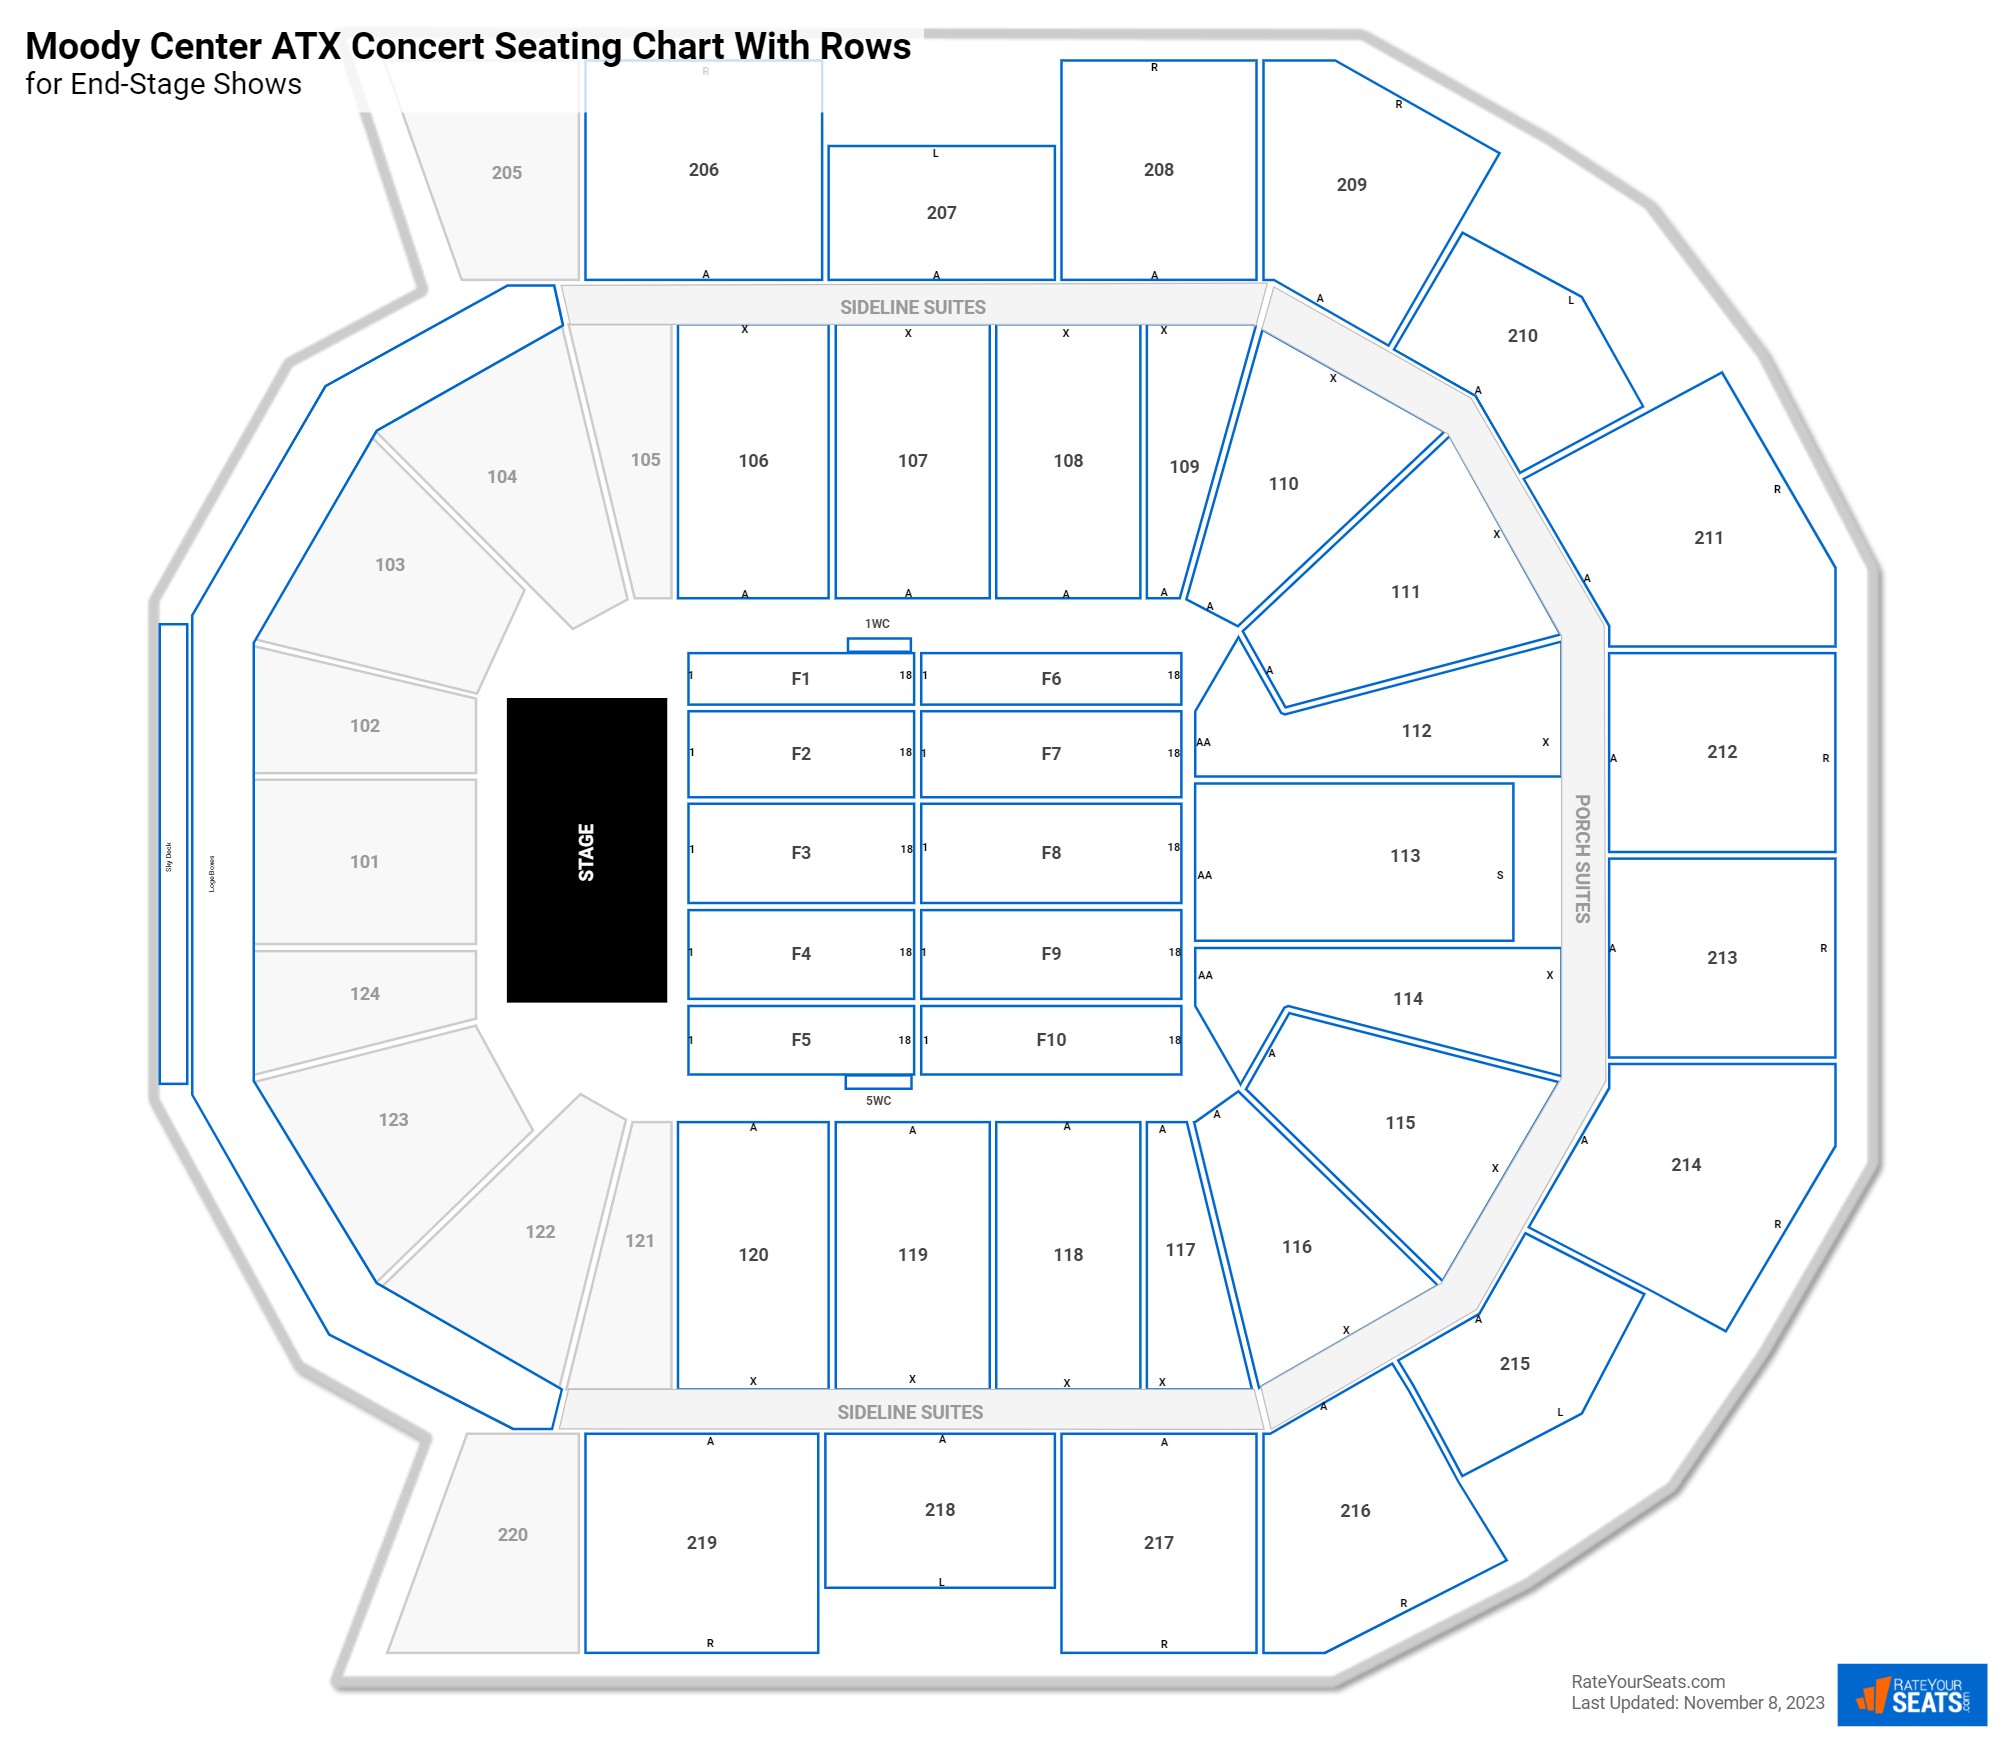 Moody Center ATX seating chart with row numbers